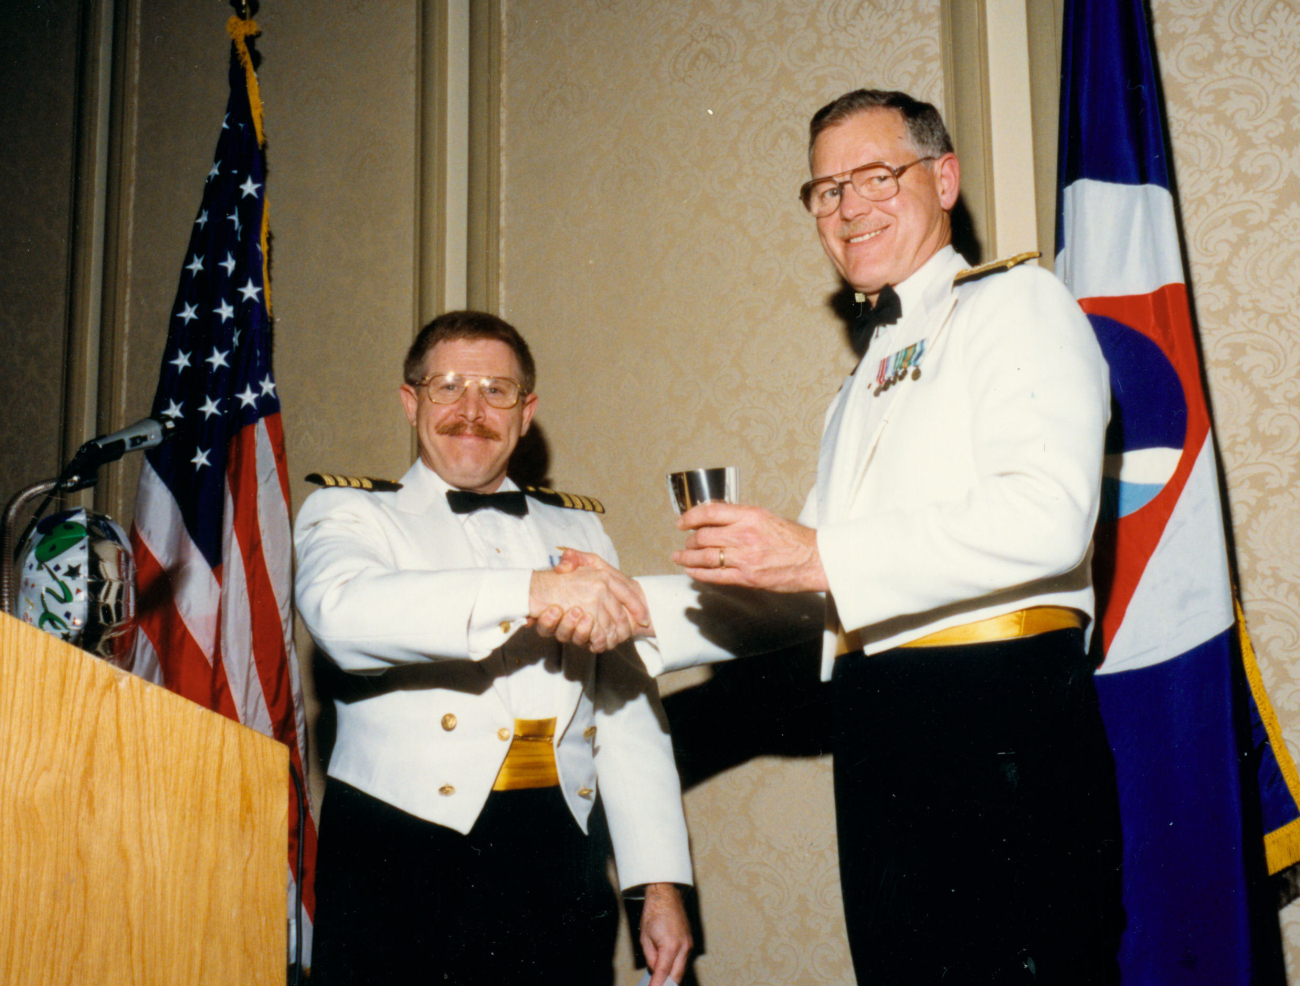 Rear Admiral Sig Petersen, Director of NOAA Corps, and Captain Arthur Flior atdining out